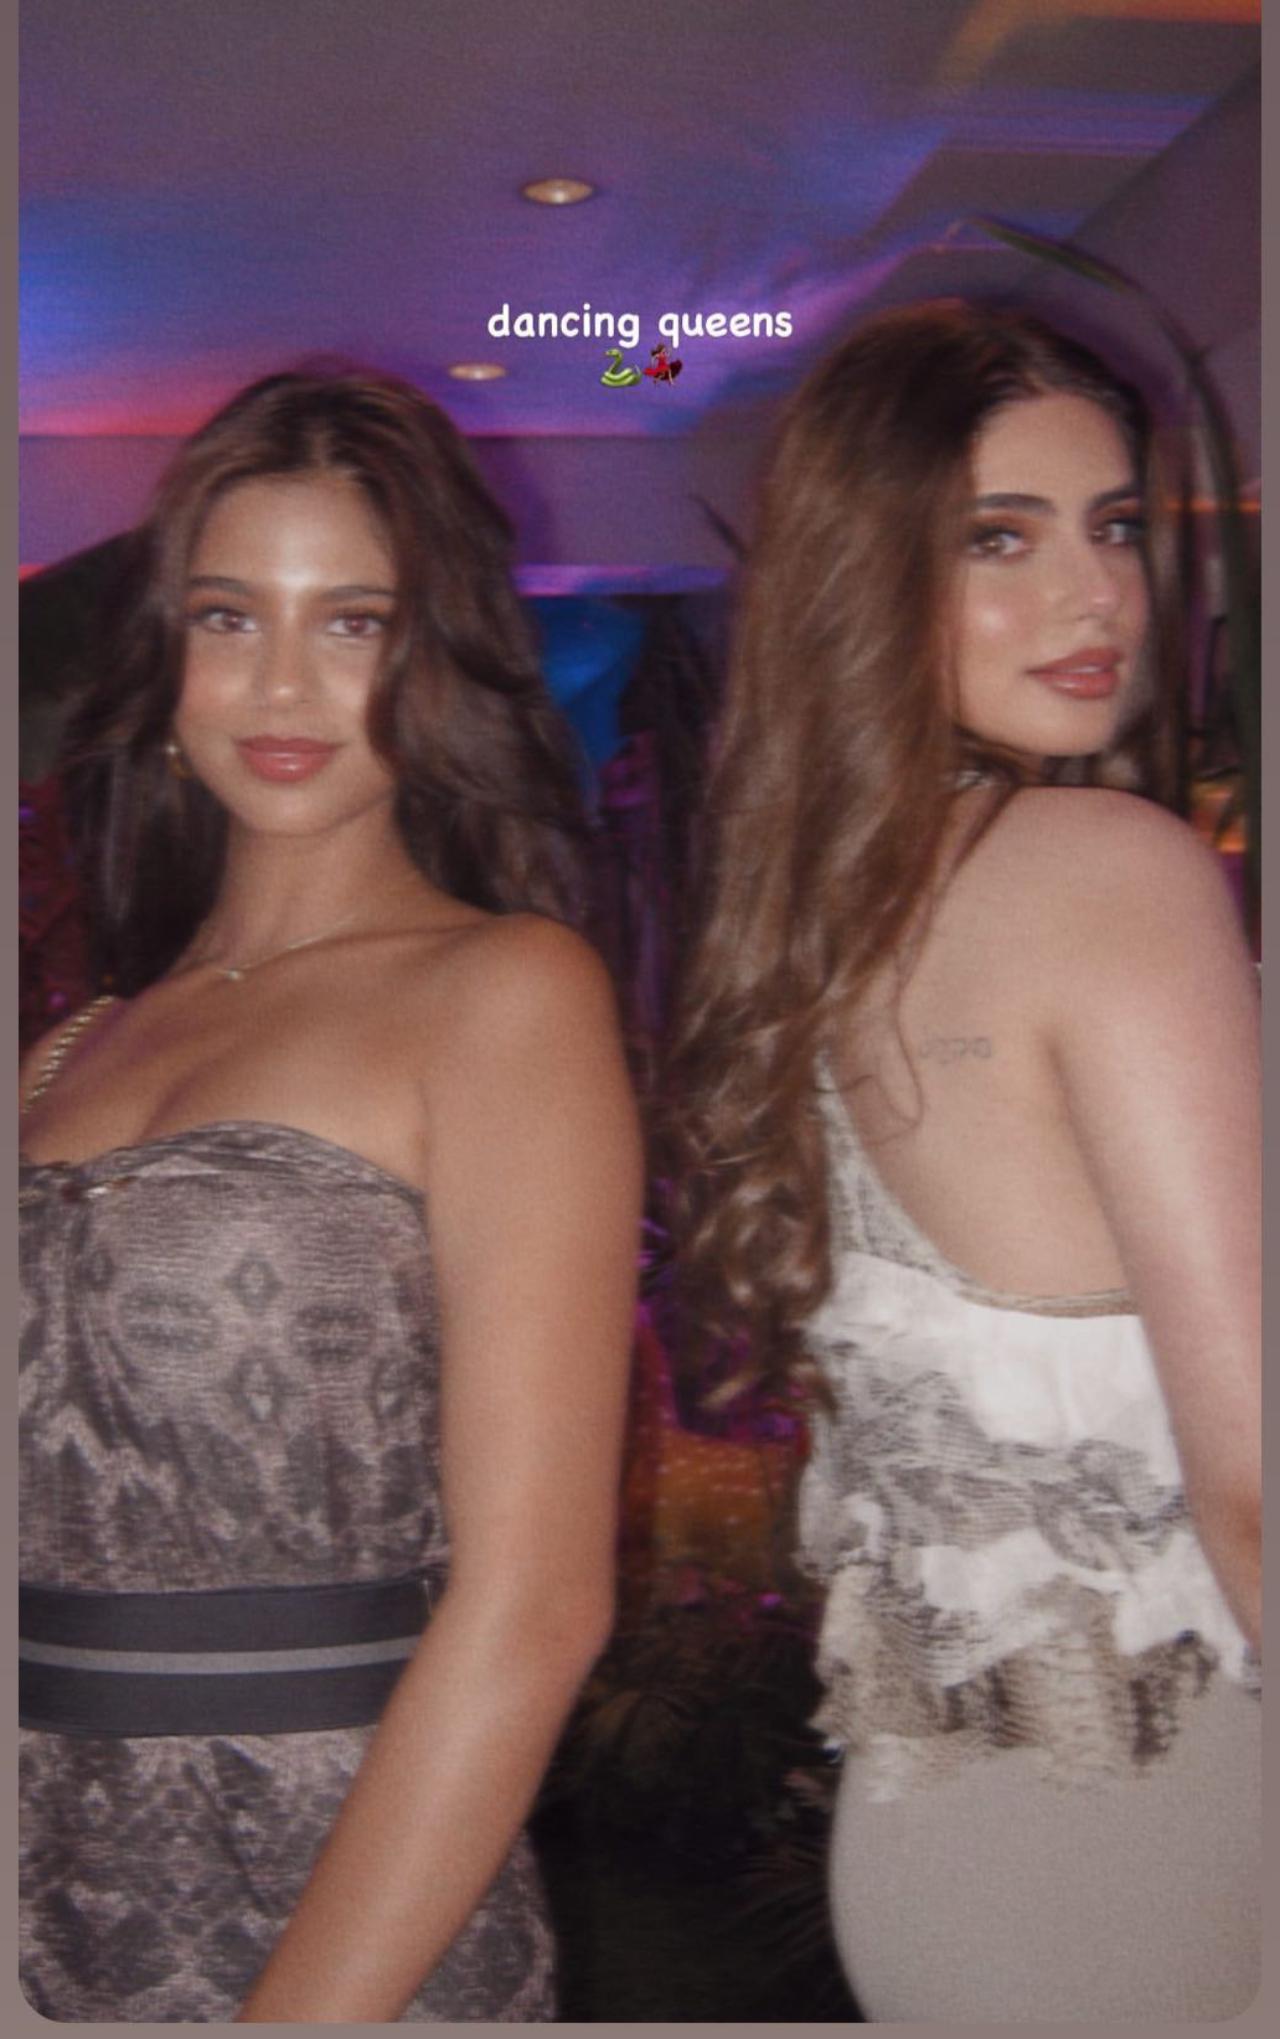 Suhana Khan re-shared a post by a friend where she is seen posing with the said friend. Her friend captioned the picture as 'dancing queens'